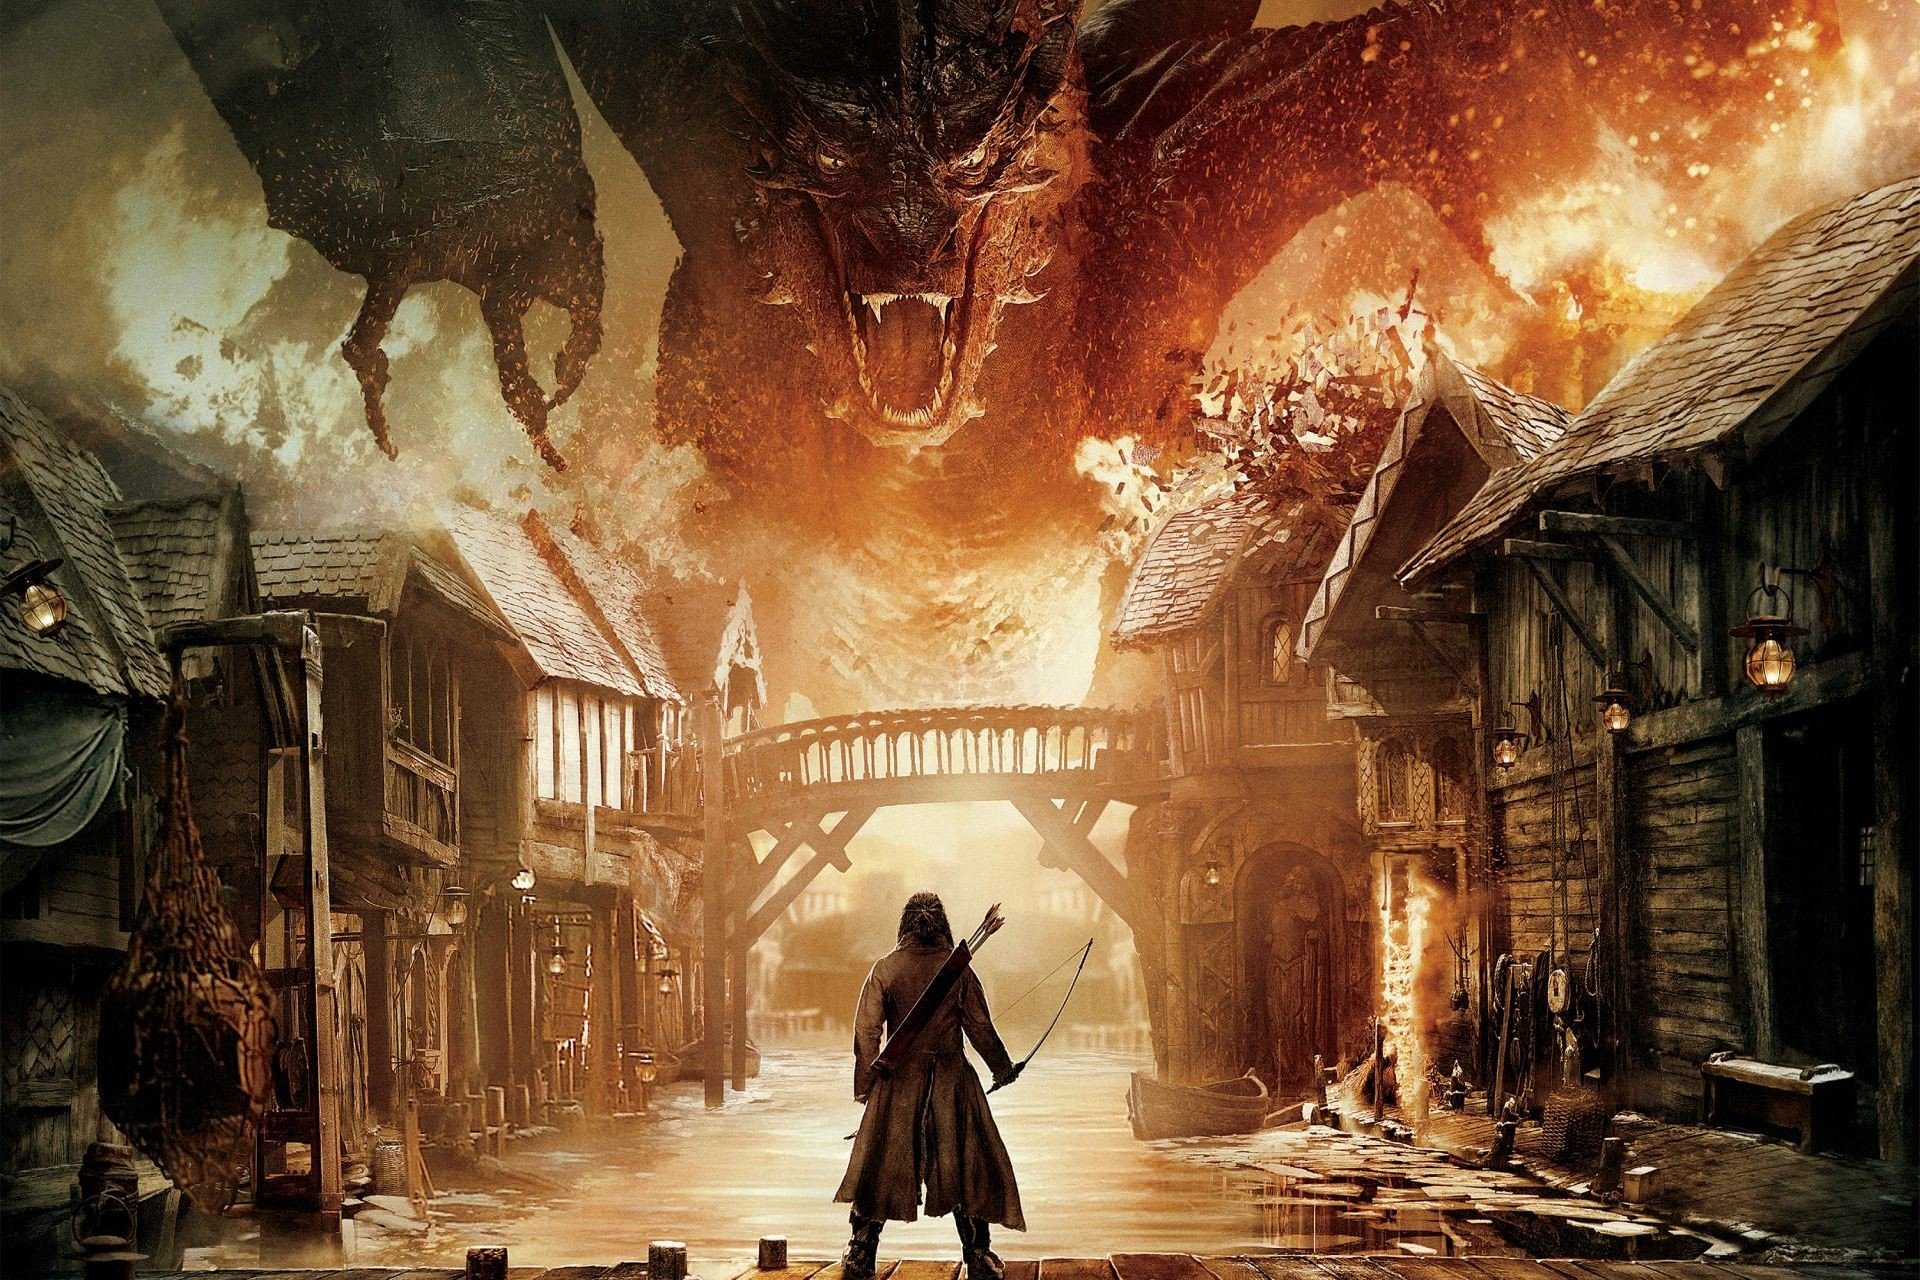 Smaug, The Hobbit: The Battle of the Five Armies, Dragon, The Hobbit Wallpaper